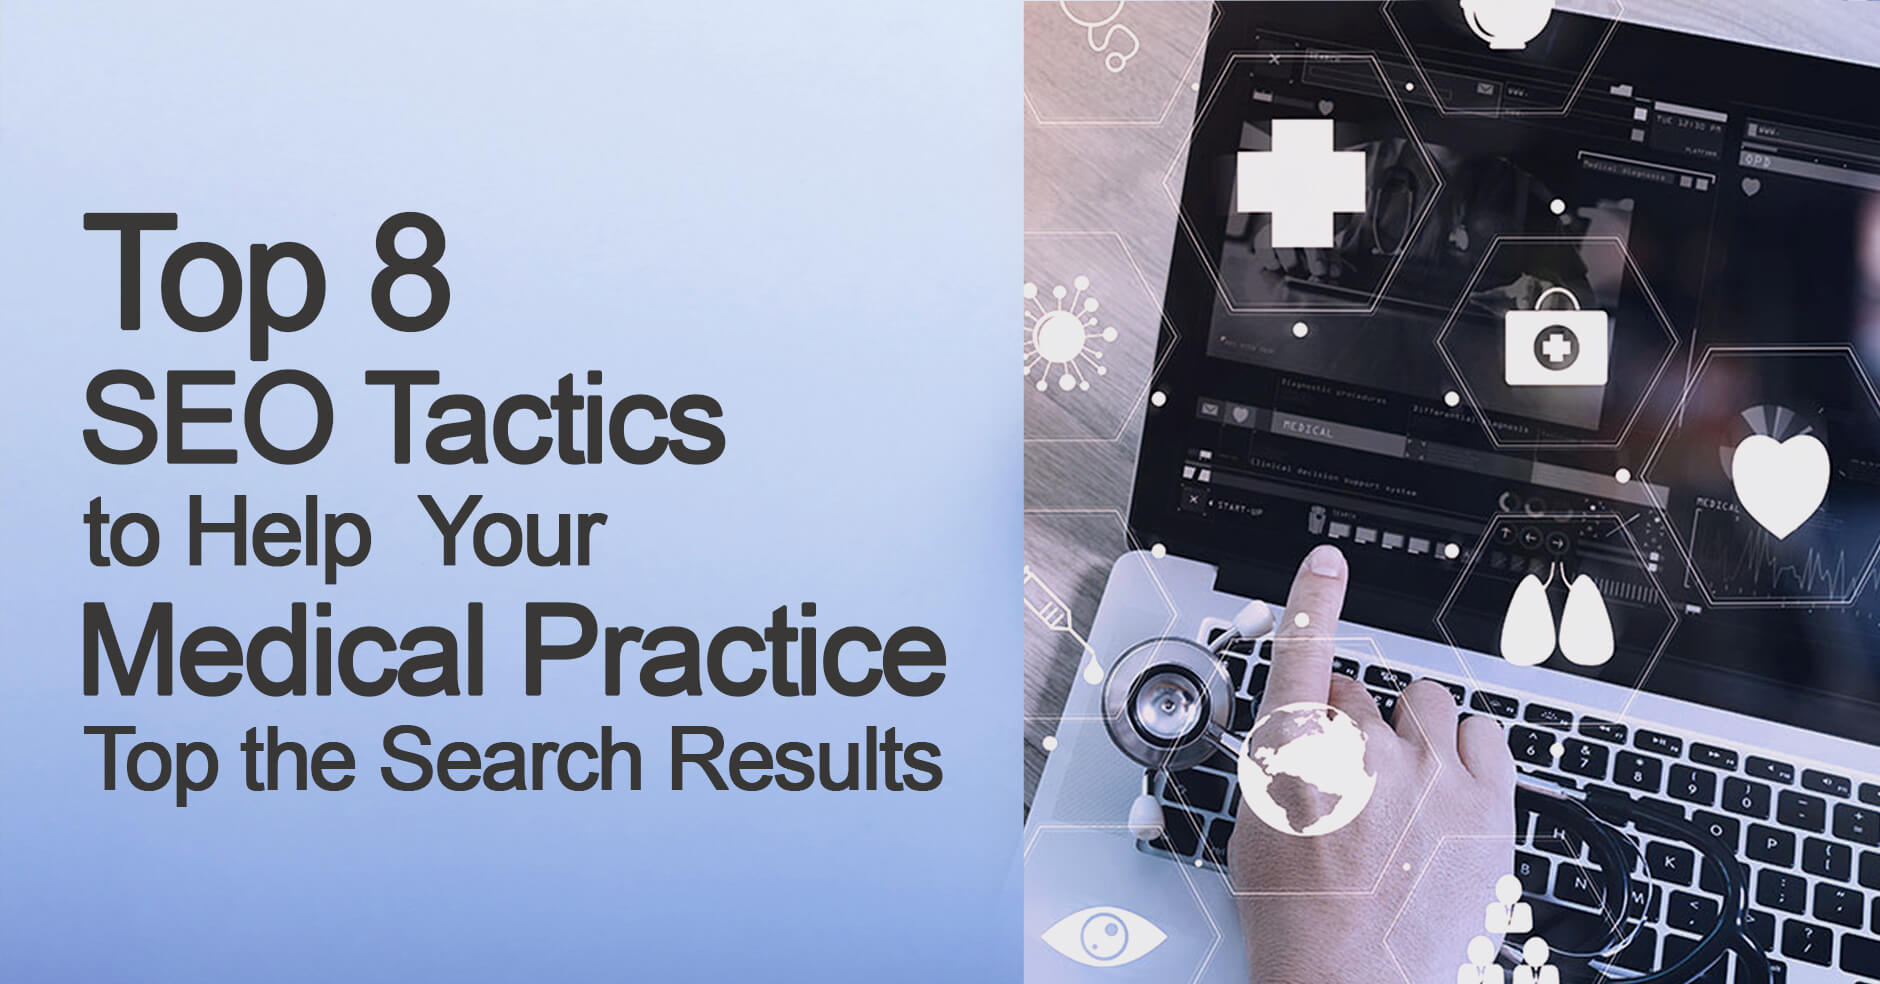 Top 8 SEO Tactics to Help Your Medical Practice Top the Search Results